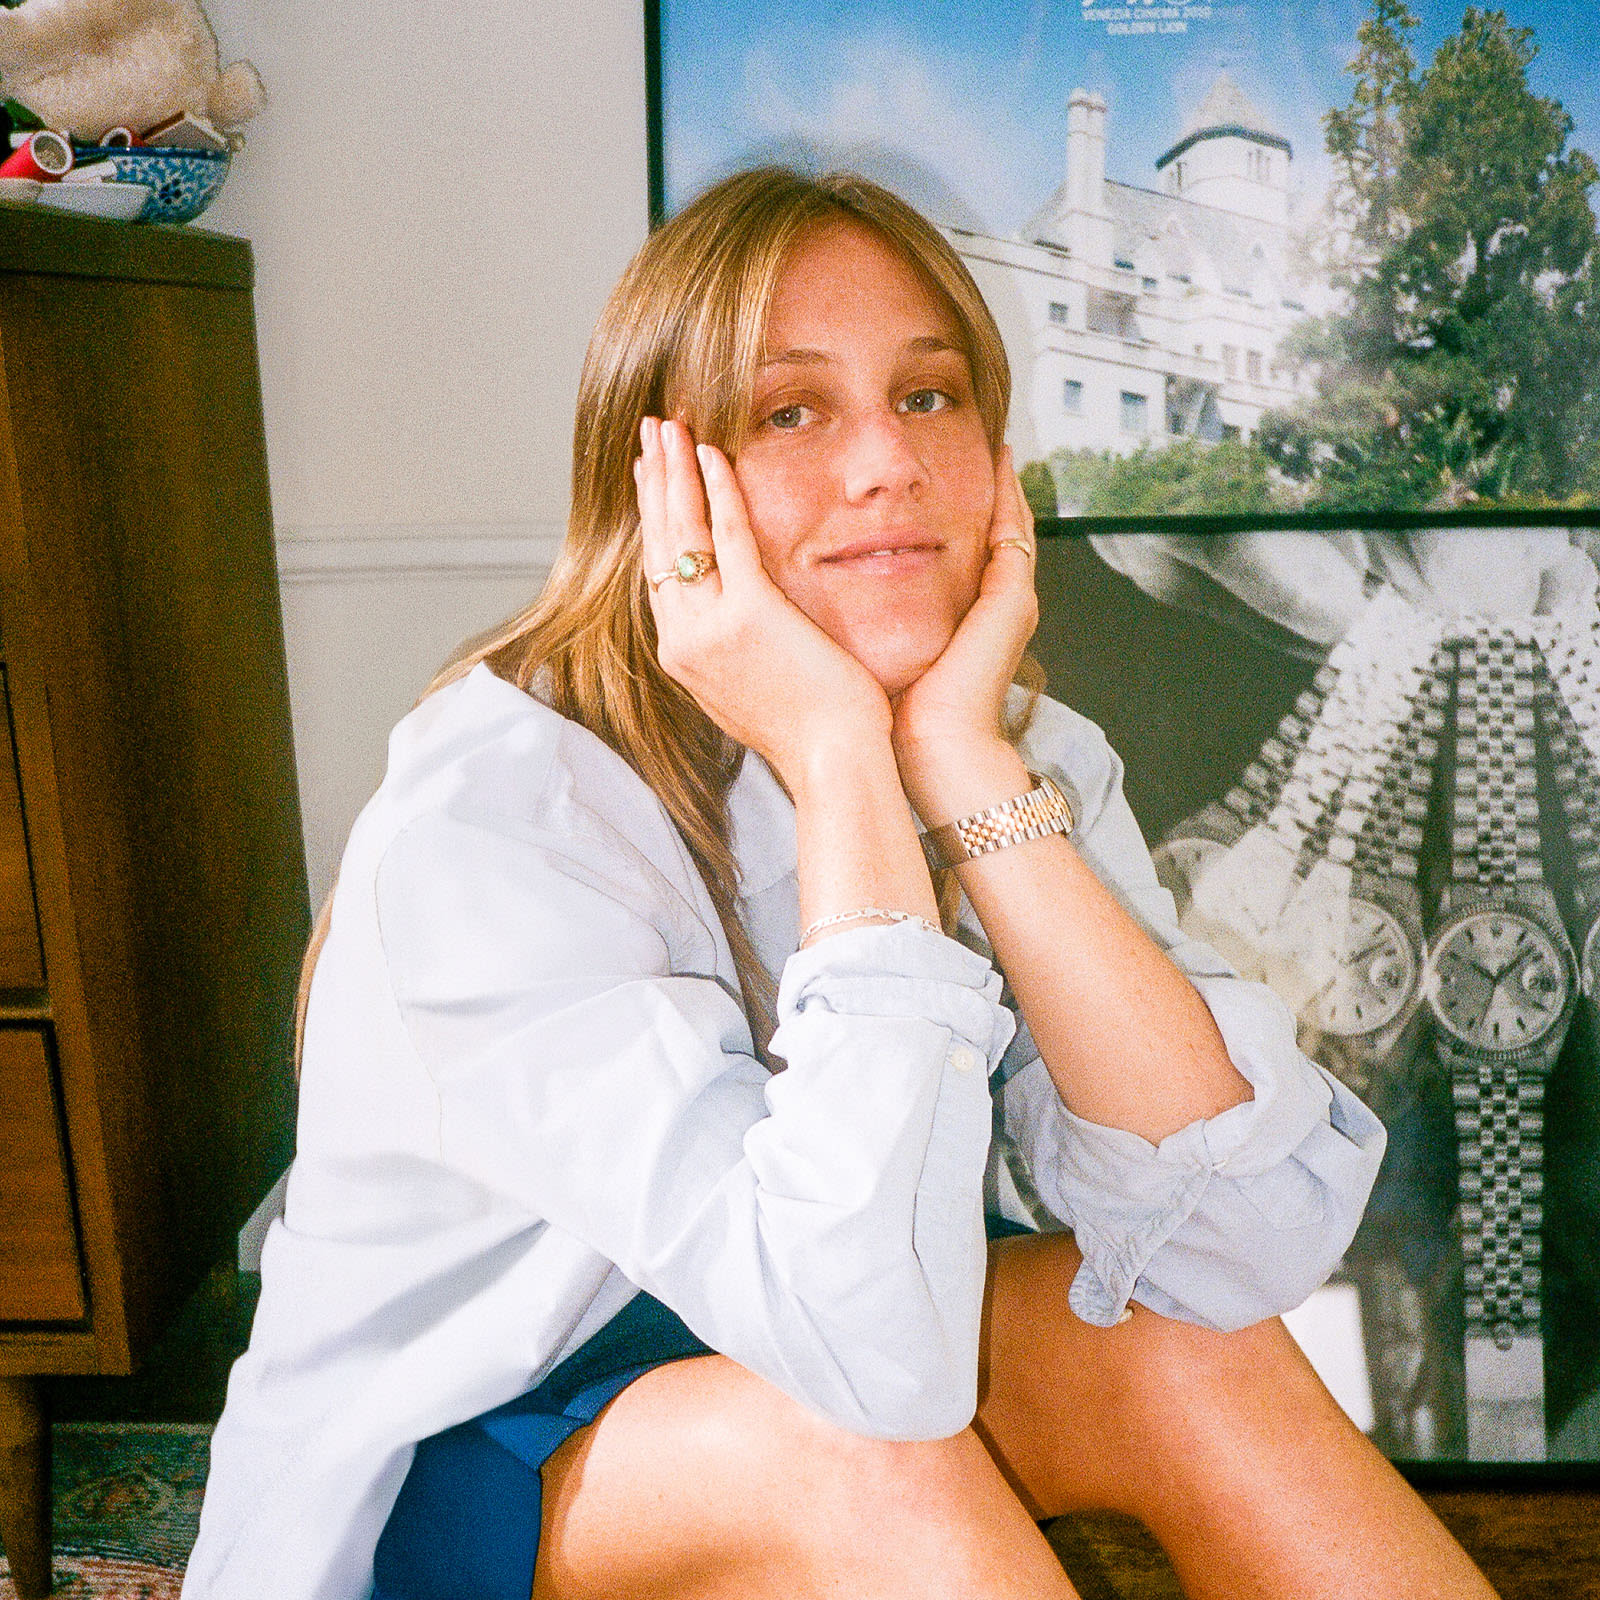 How I live: Brynn Wallner on women and watches